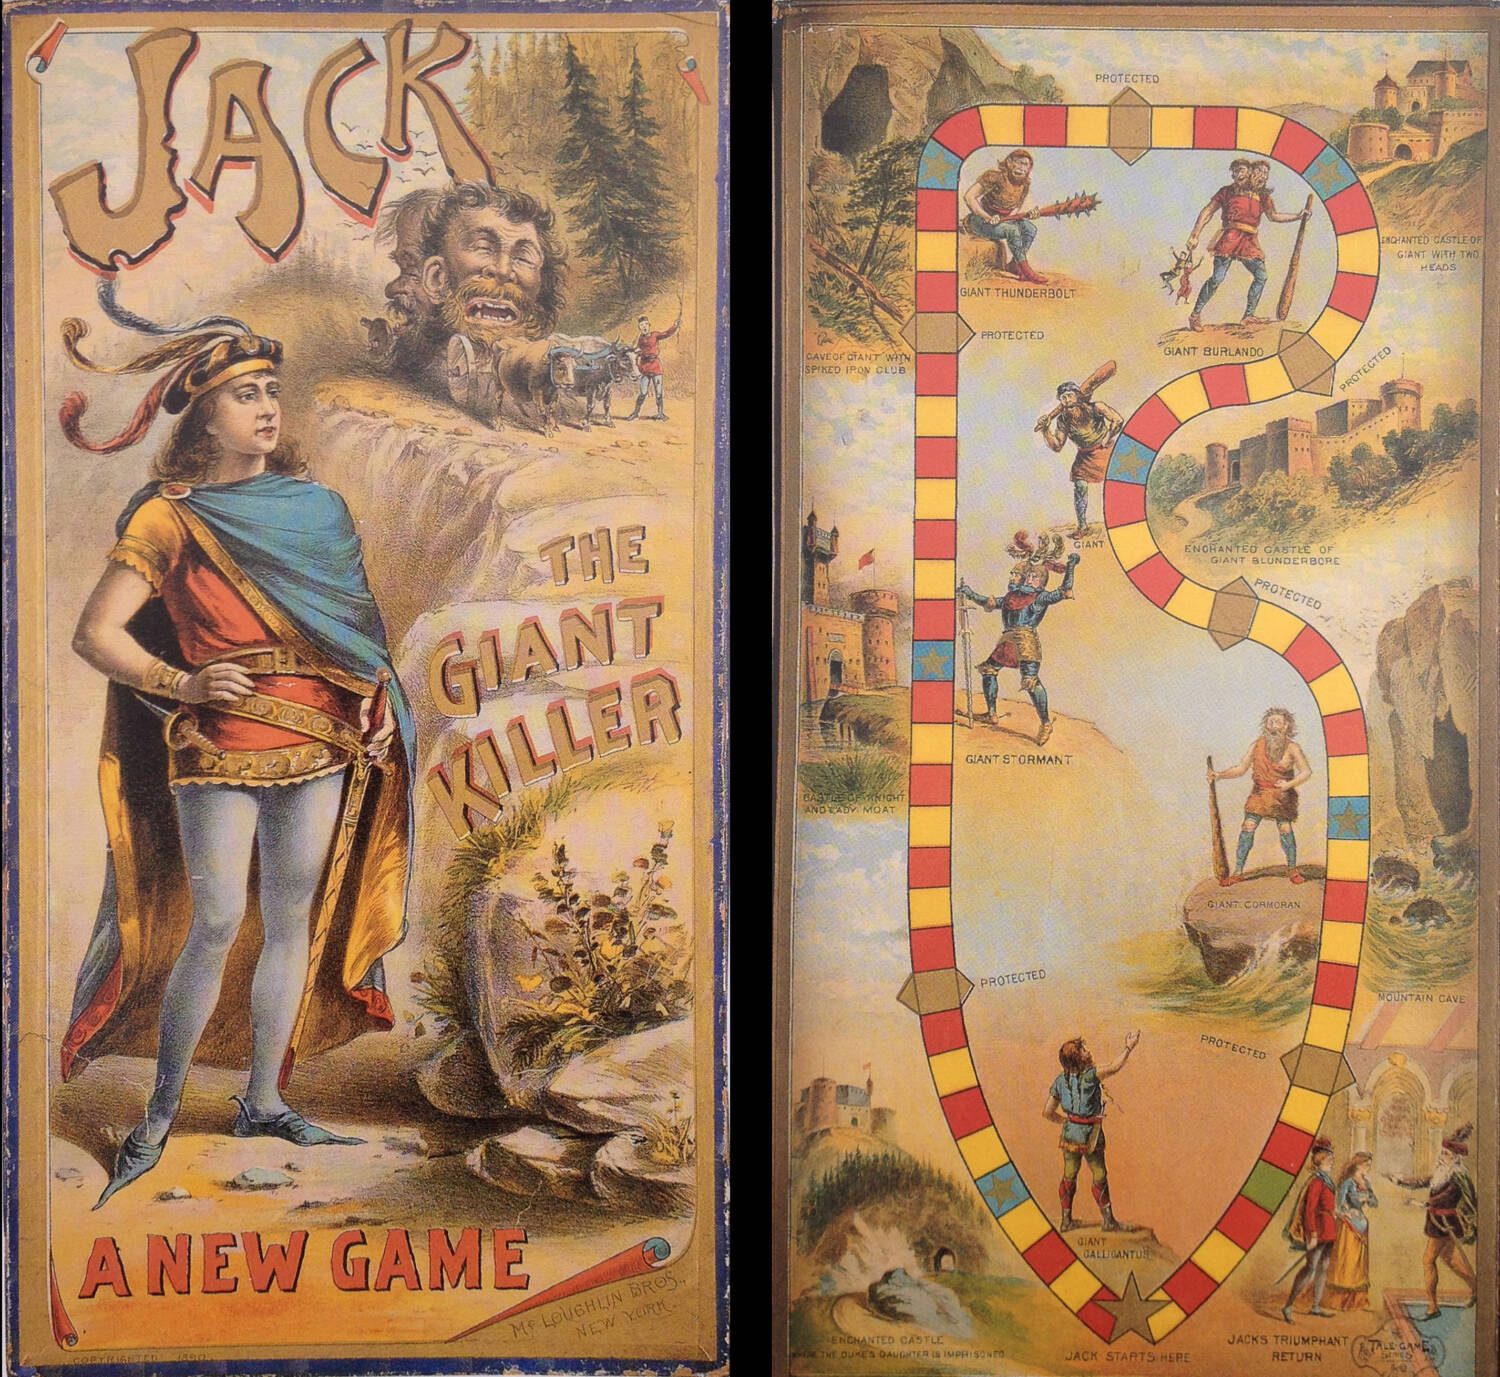 Jack the Giant Killer box and board artwork.